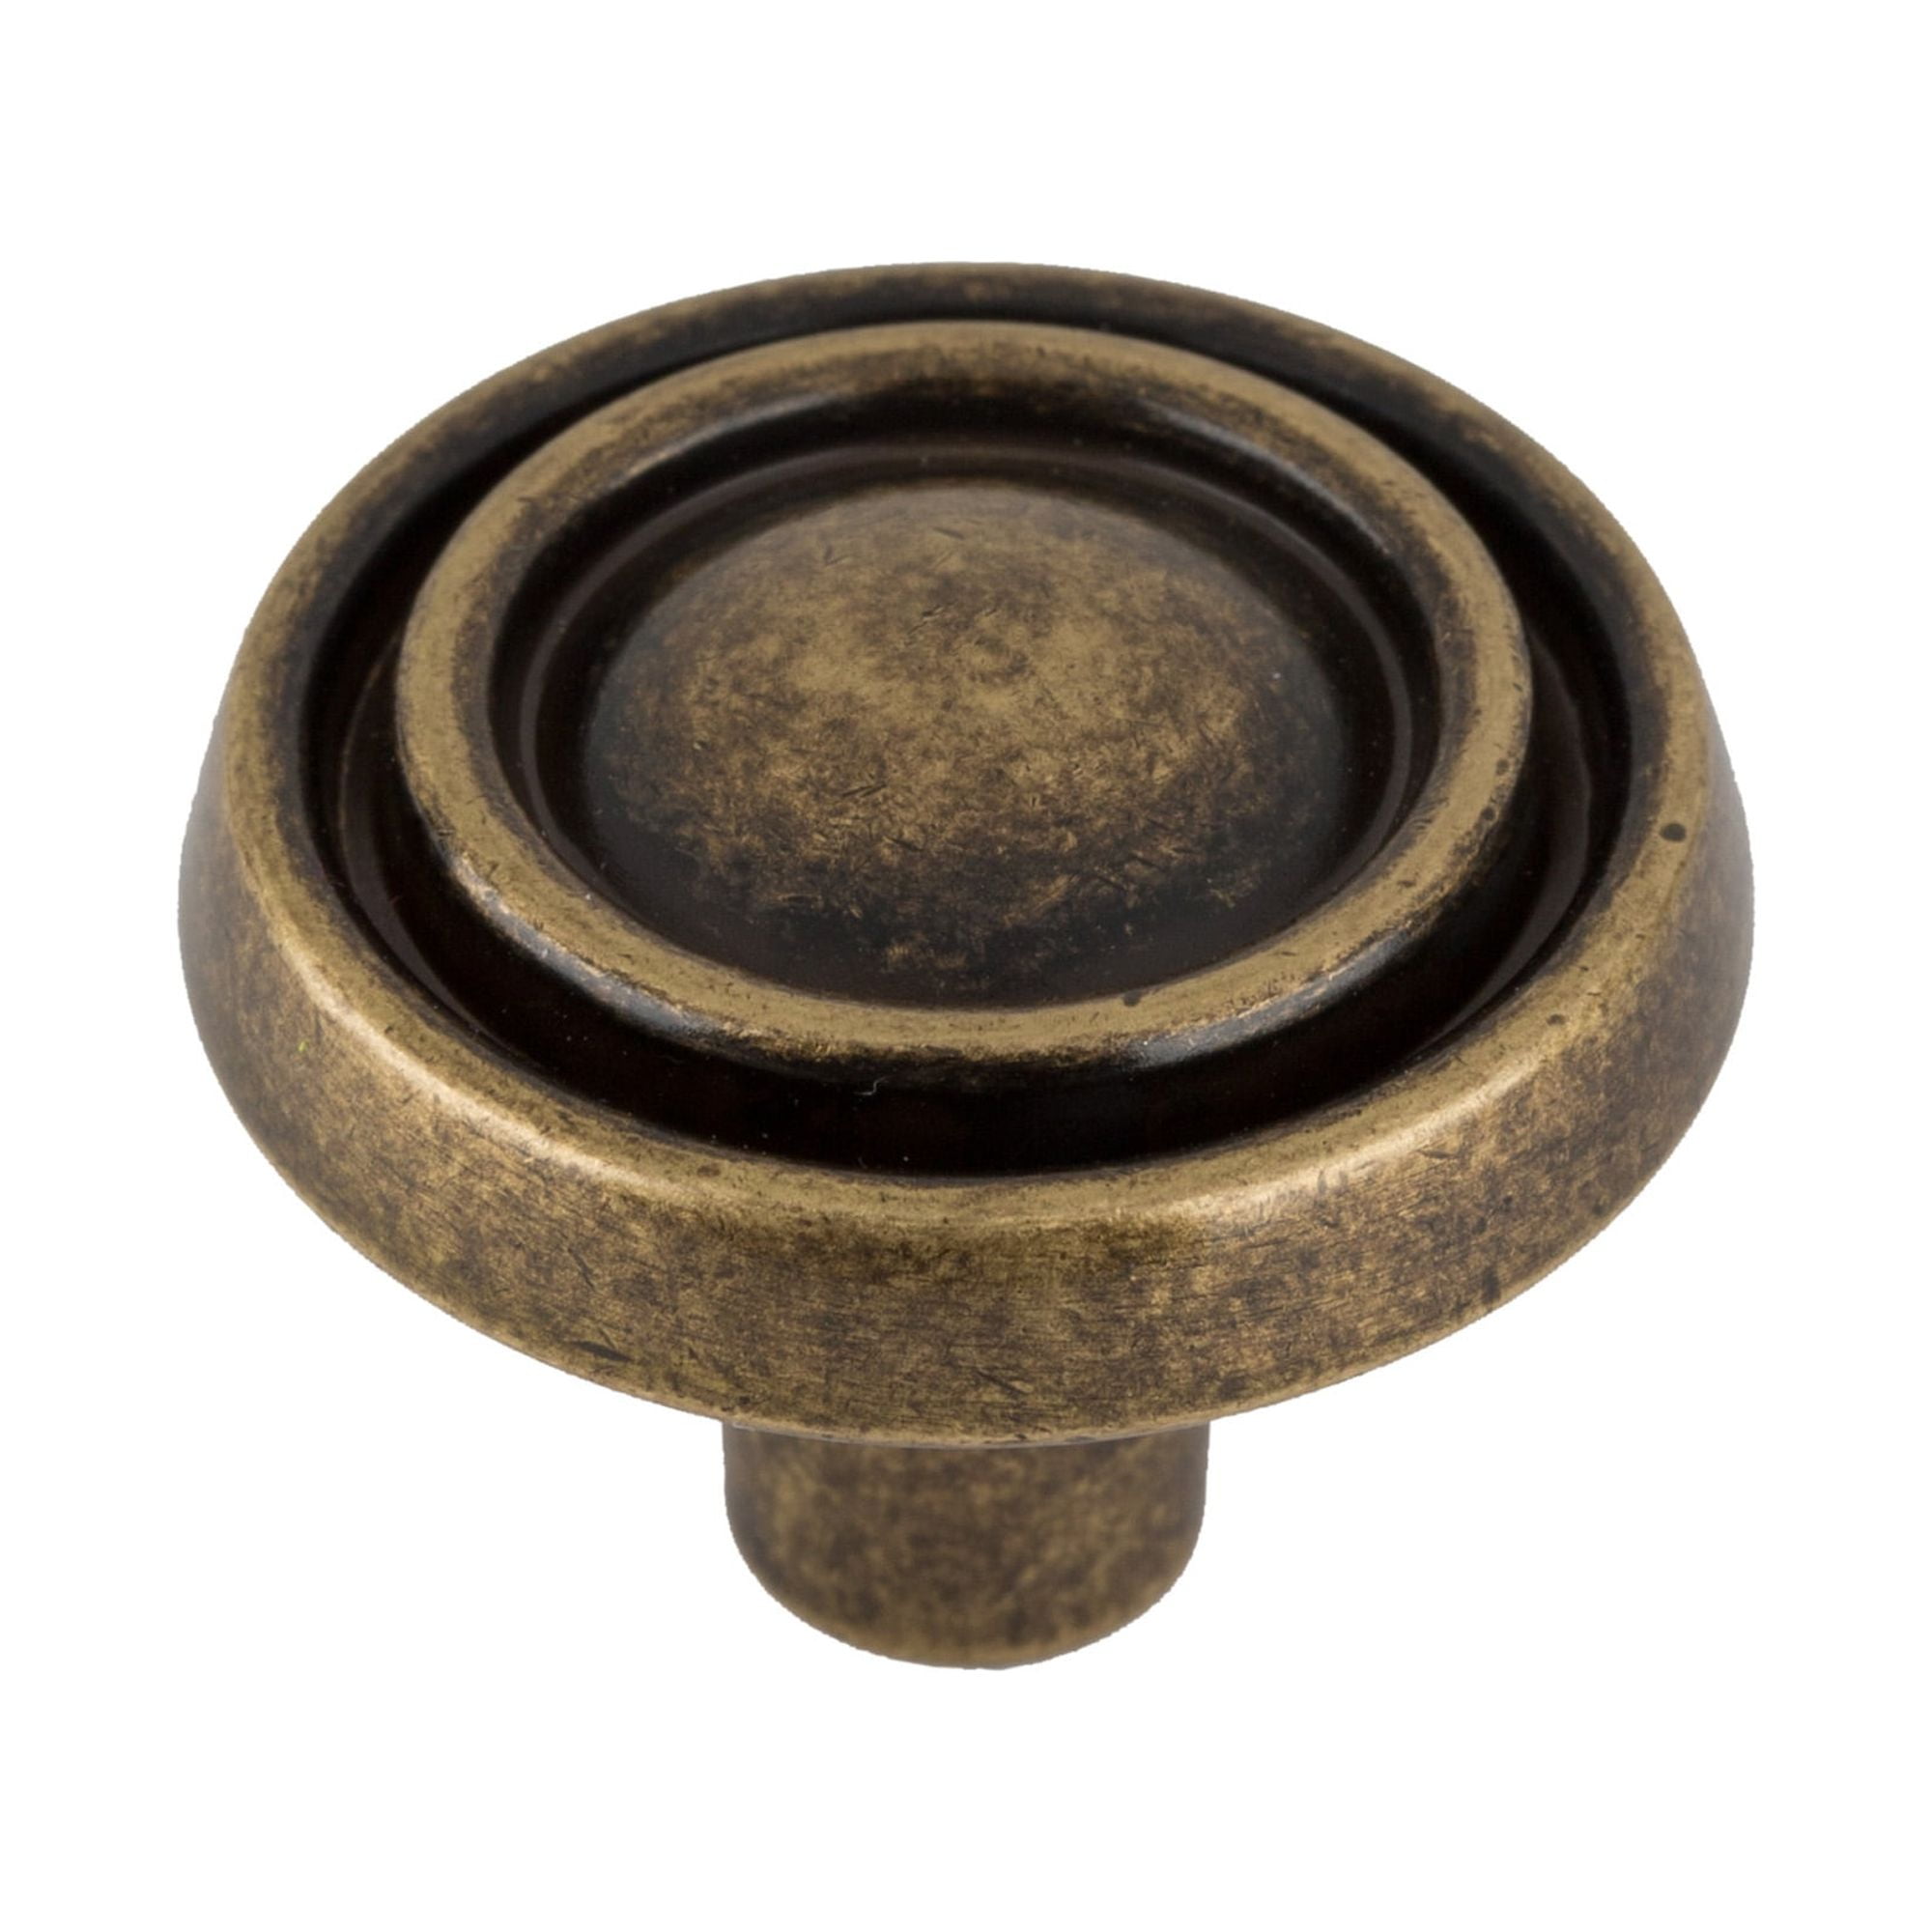 Mainstays 1-3/16 Traditional Cabinet Knob, Antique Brass, 2 Pack 